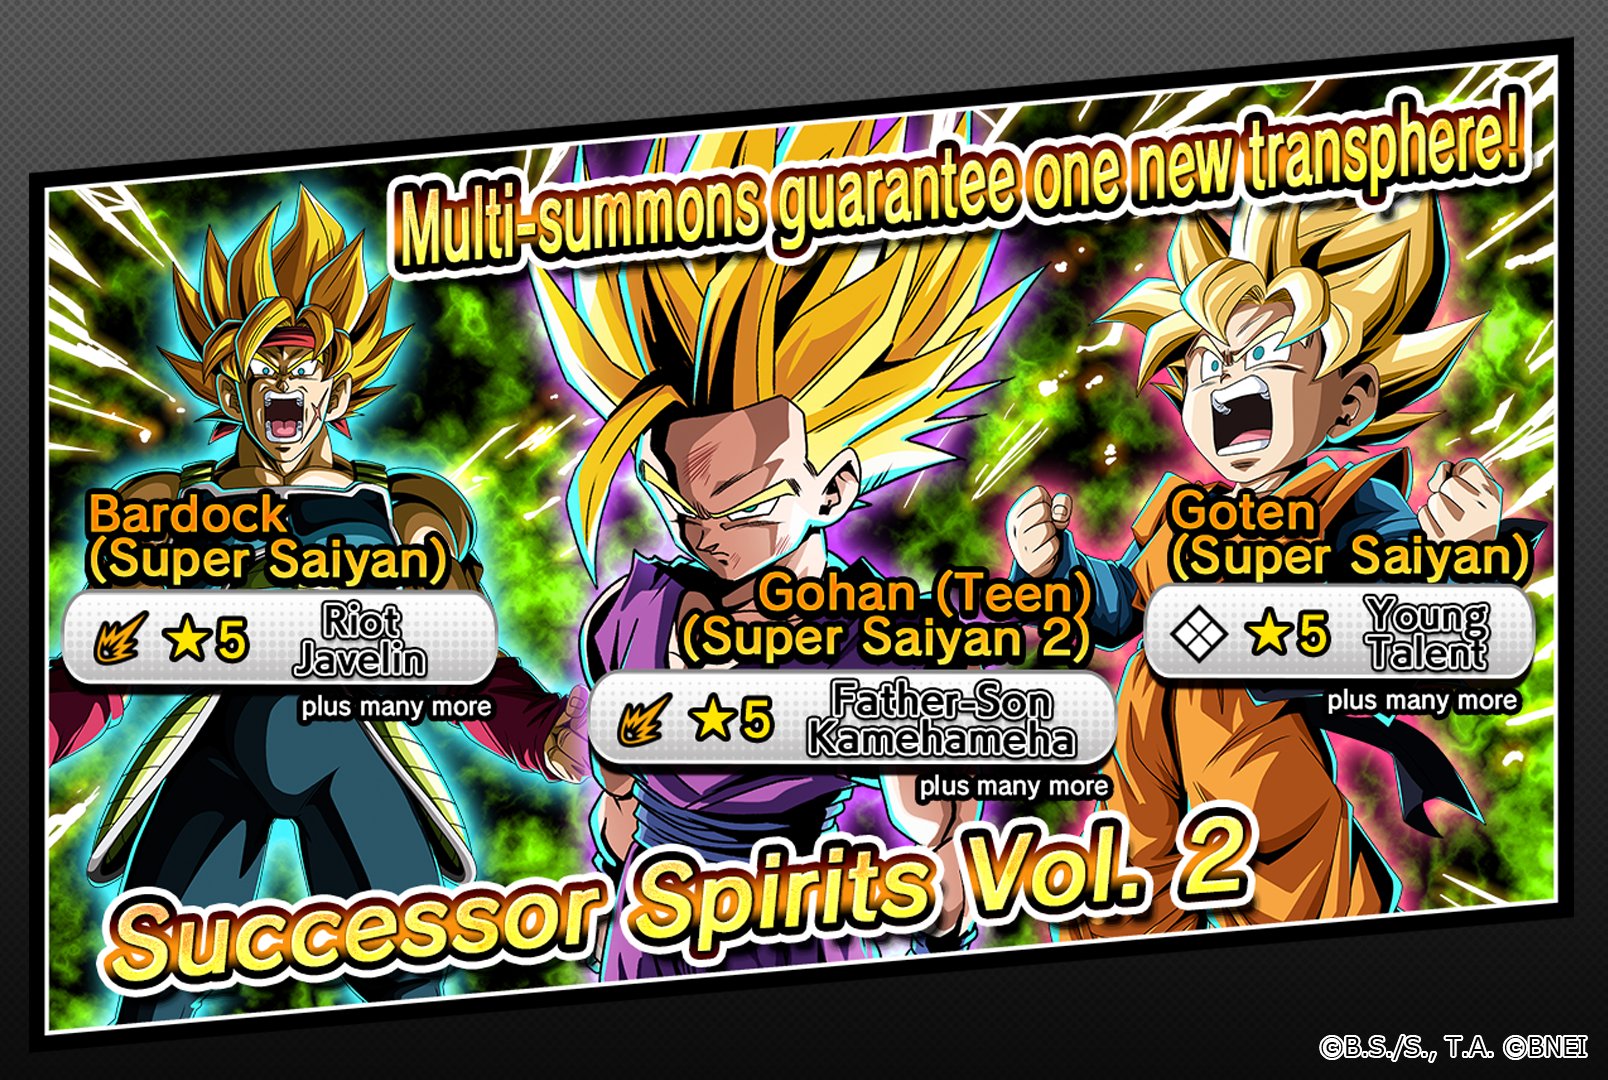 Dragon Ball: THE BREAKERS will have 3 editions: Standard: €15-€19, Special: €29.99, Limited: €79.99, Closed Beta dates also revealed.